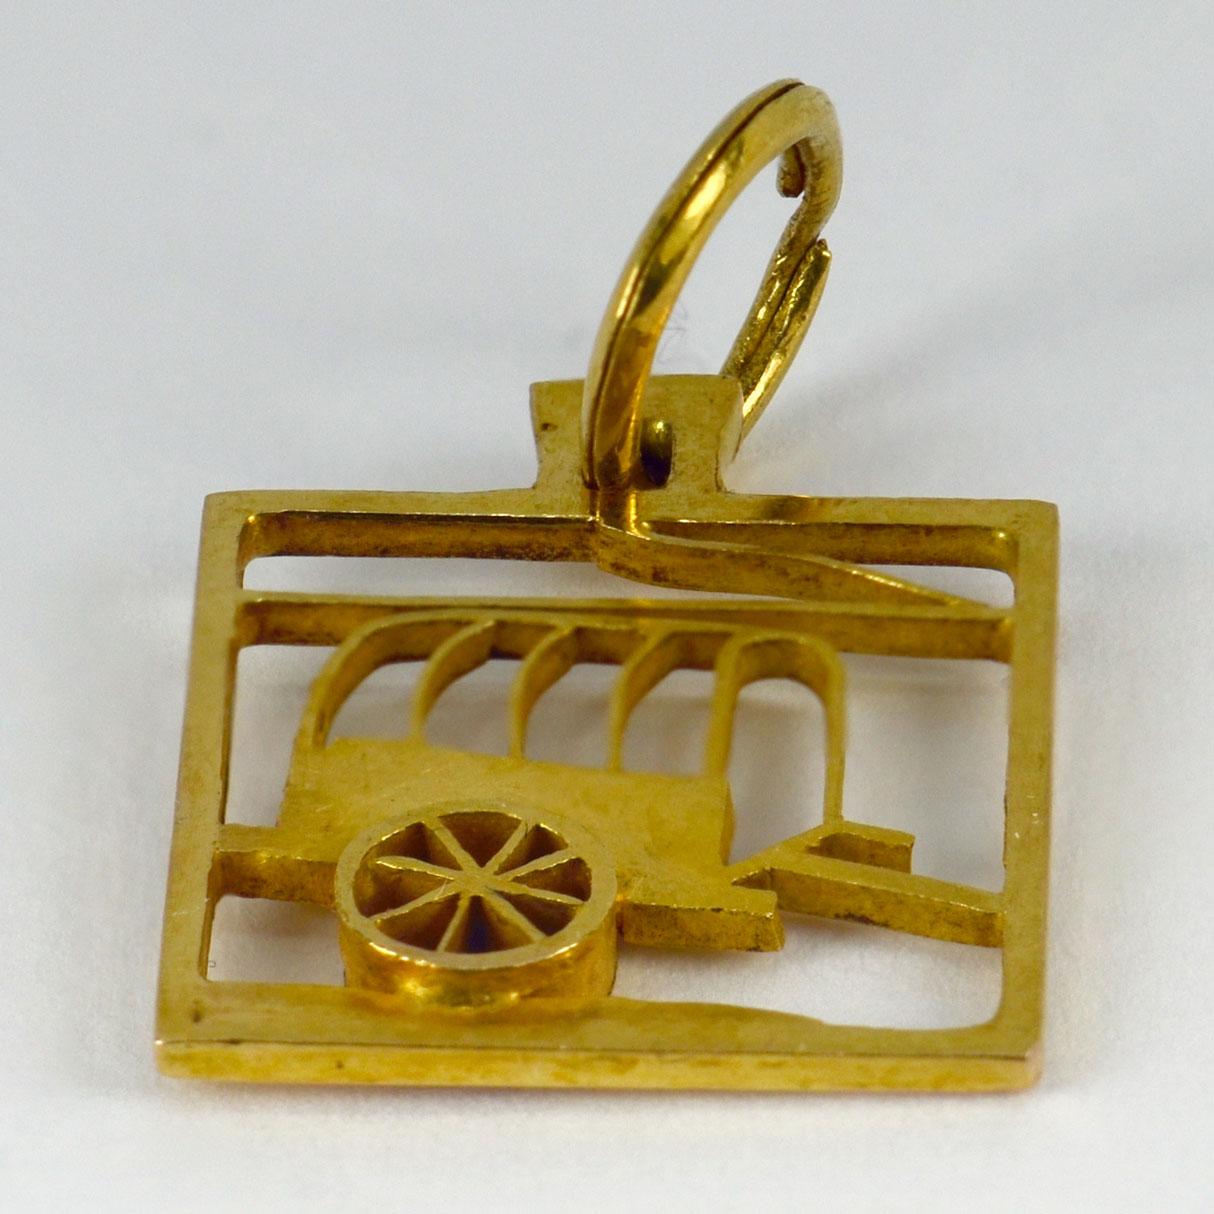 An 18 karat (18K)  yellow gold square charm pendant designed as a wagon. Unmarked but tested as at least 18 karat gold.

Dimensions: 1.9 x 1.5 x 0.2 cm (not including jump ring)
Weight: 1.85 grams
